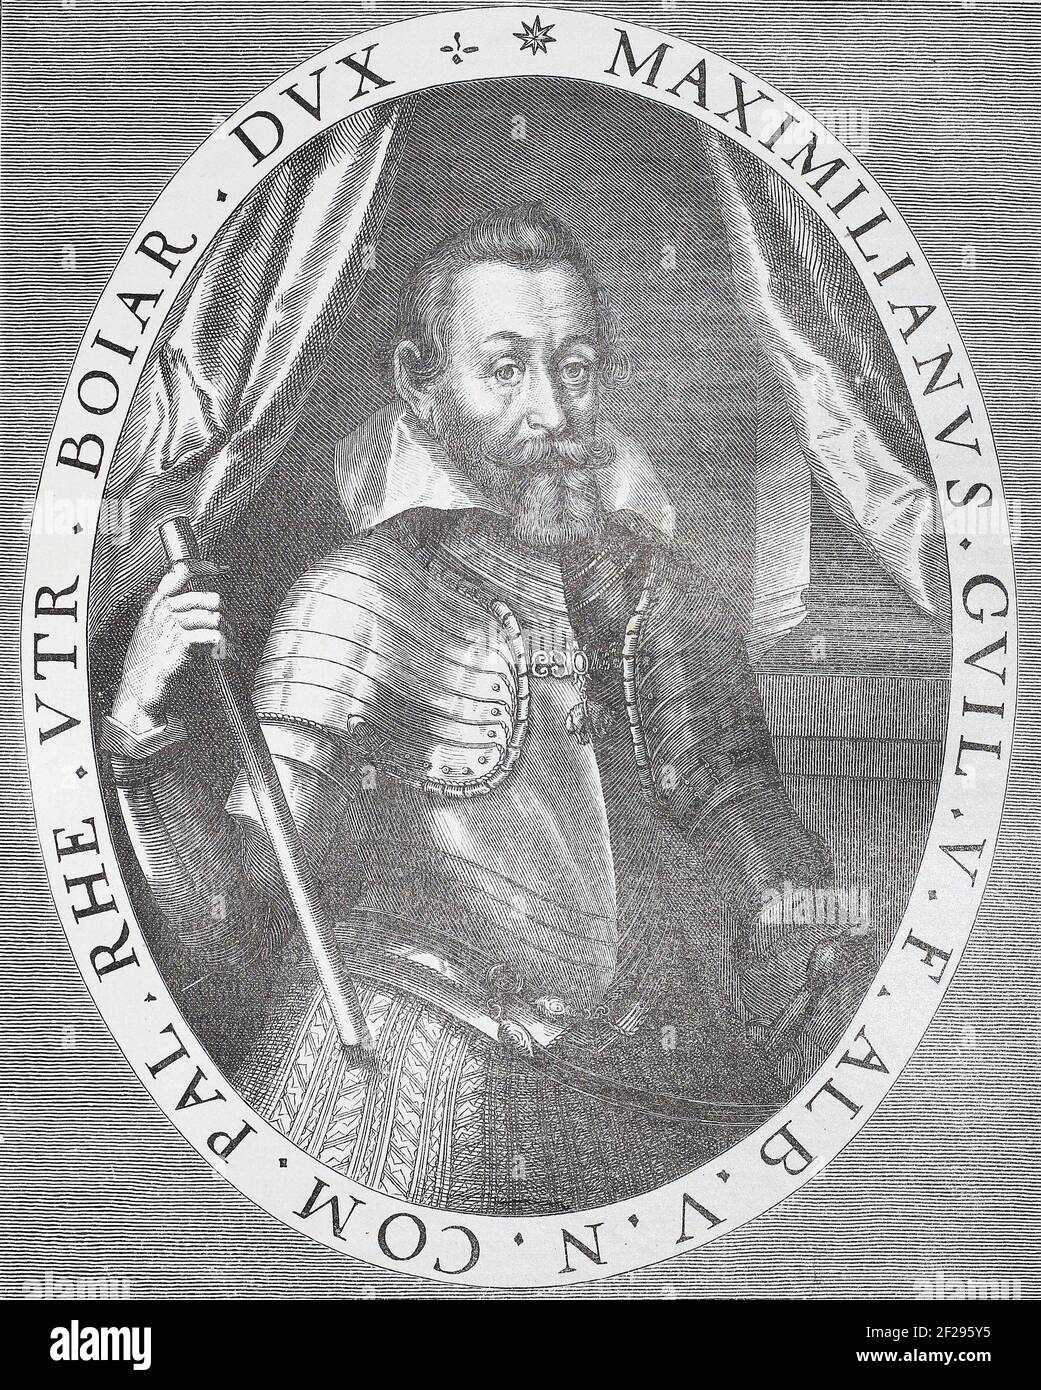 Maximilian I, Elector of Bavaria. Engraving of 1620. Maximilian I (17 April 1573 – 27 September 1651), occasionally called 'the Great', a member of the House of Wittelsbach, ruled as Duke of Bavaria from 1597. His reign was marked by the Thirty Years' War during which he obtained the title of a Prince-elector of the Holy Roman Empire at the 1623 Diet of Regensburg. Stock Photo